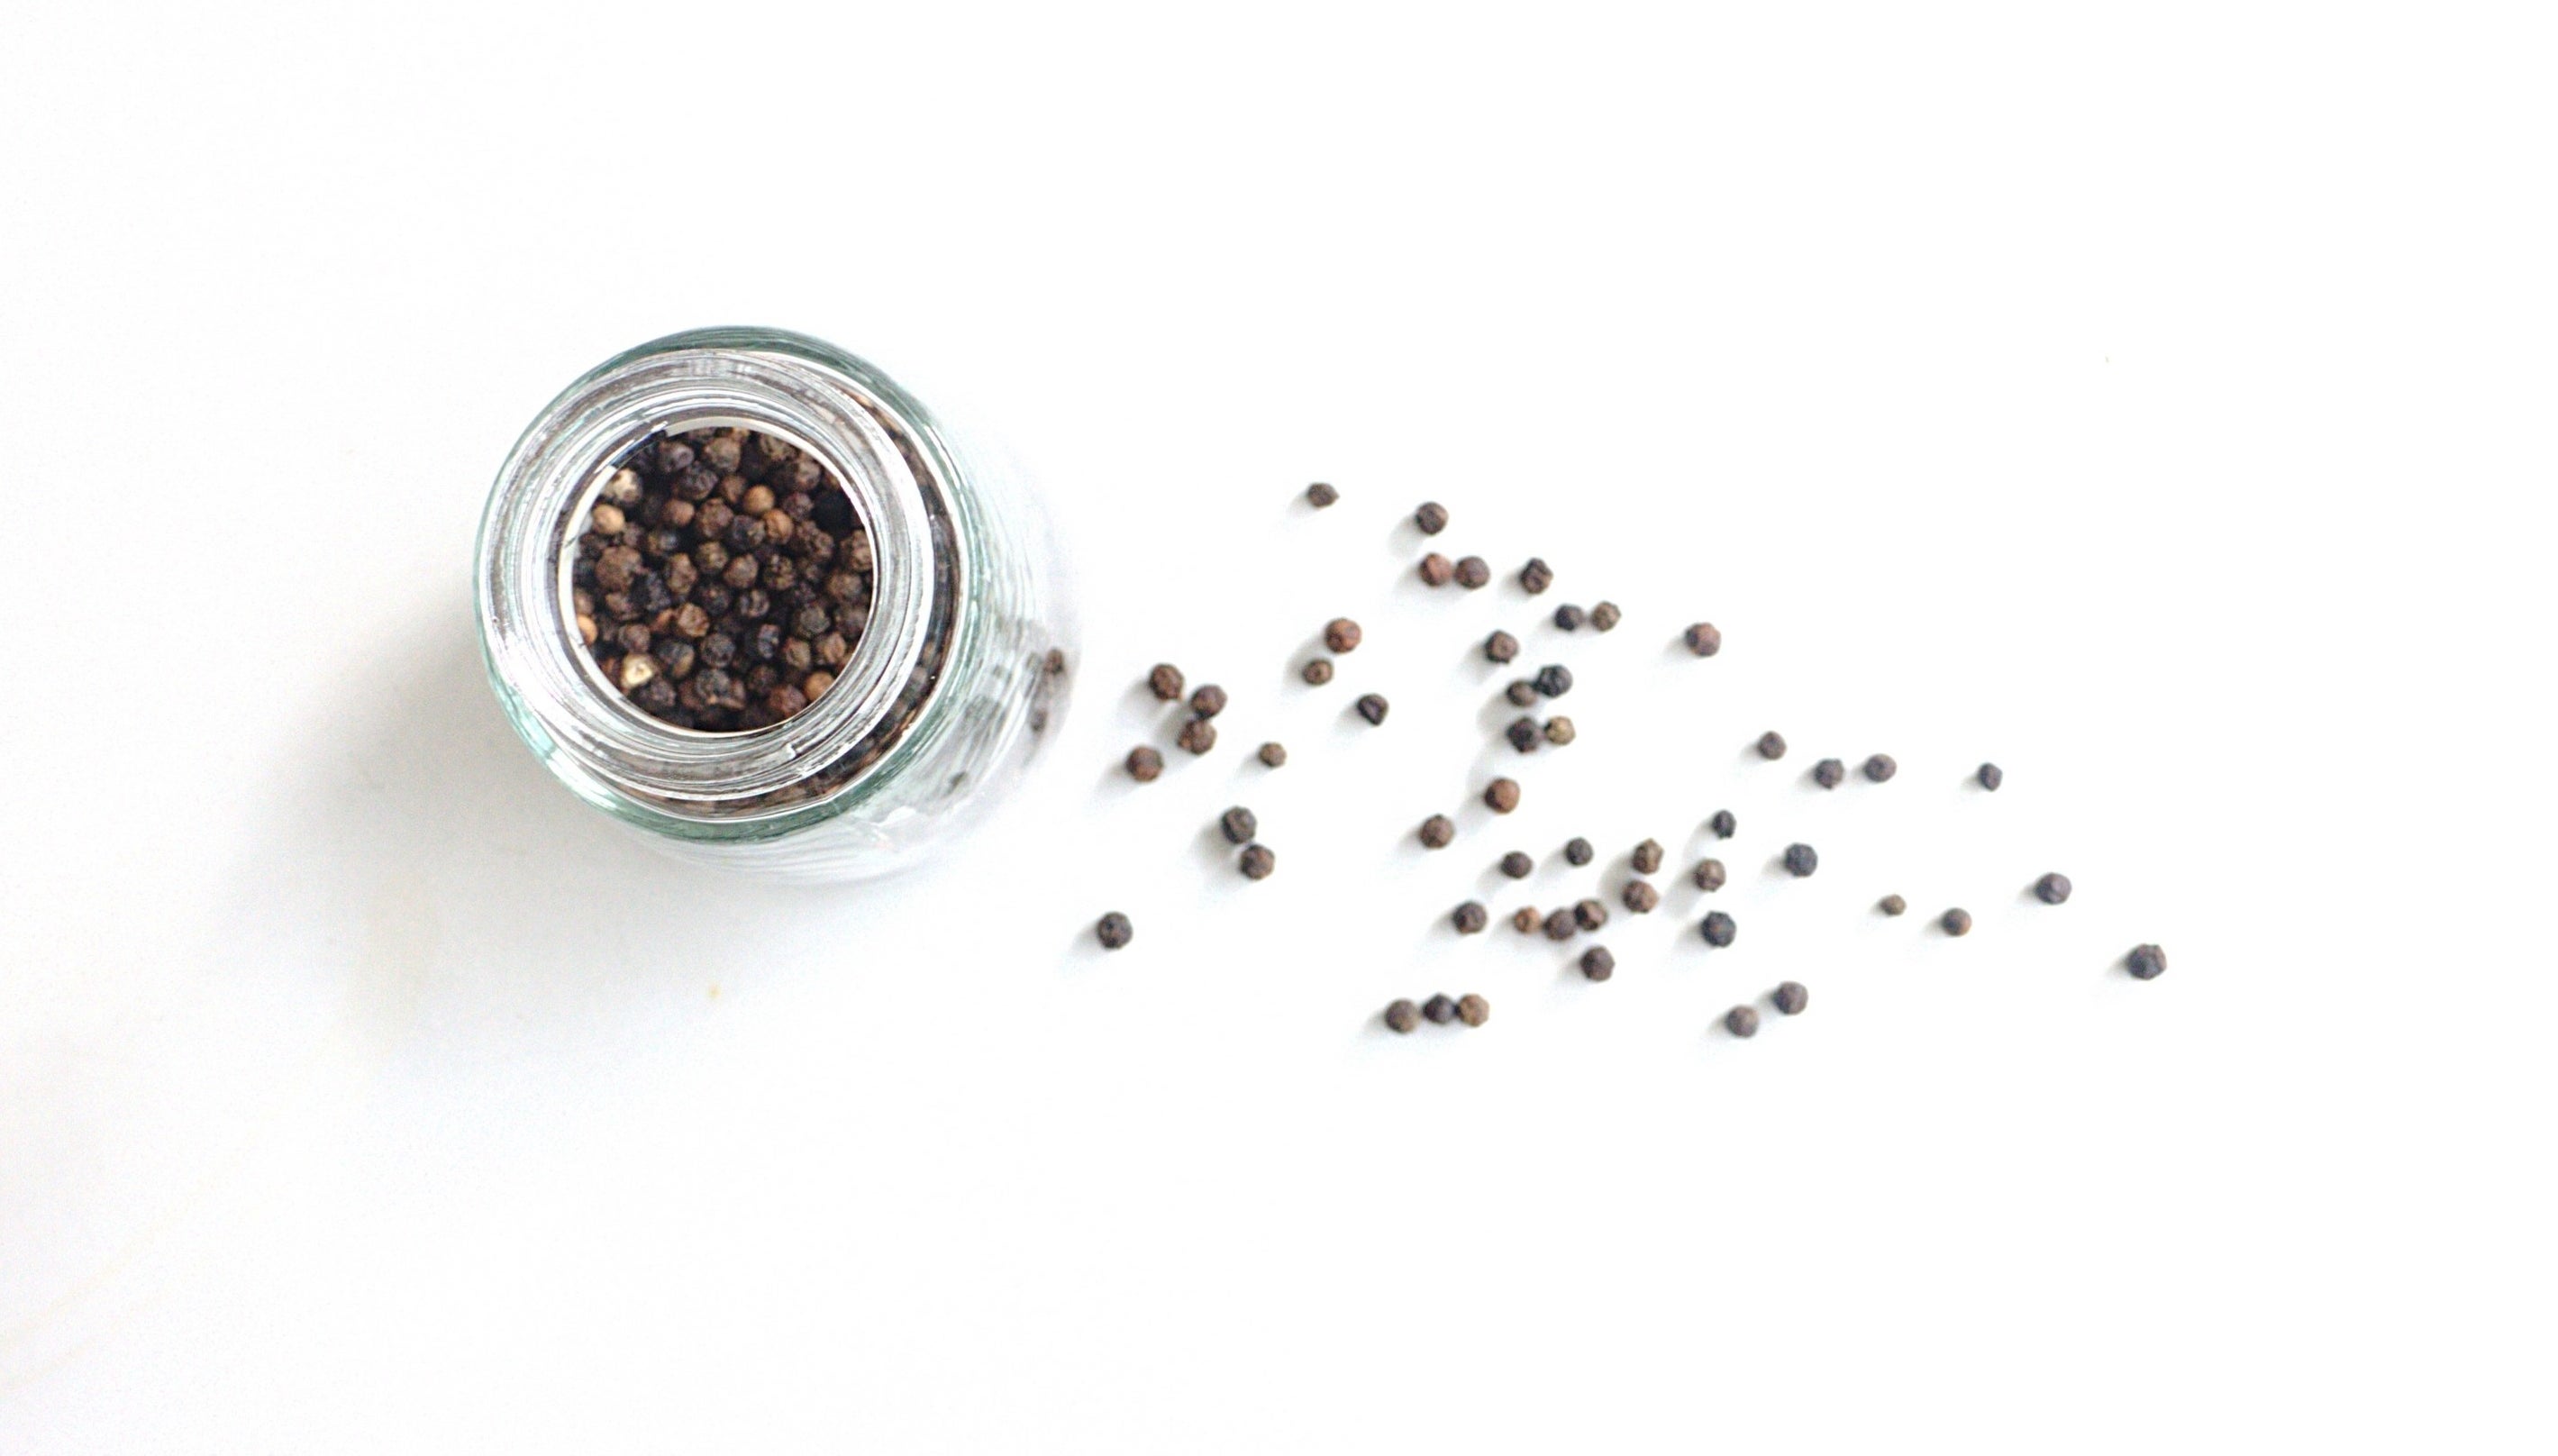 A top view of peppercorns in a small, unlidded glass container with several peppercorns strewn to the side